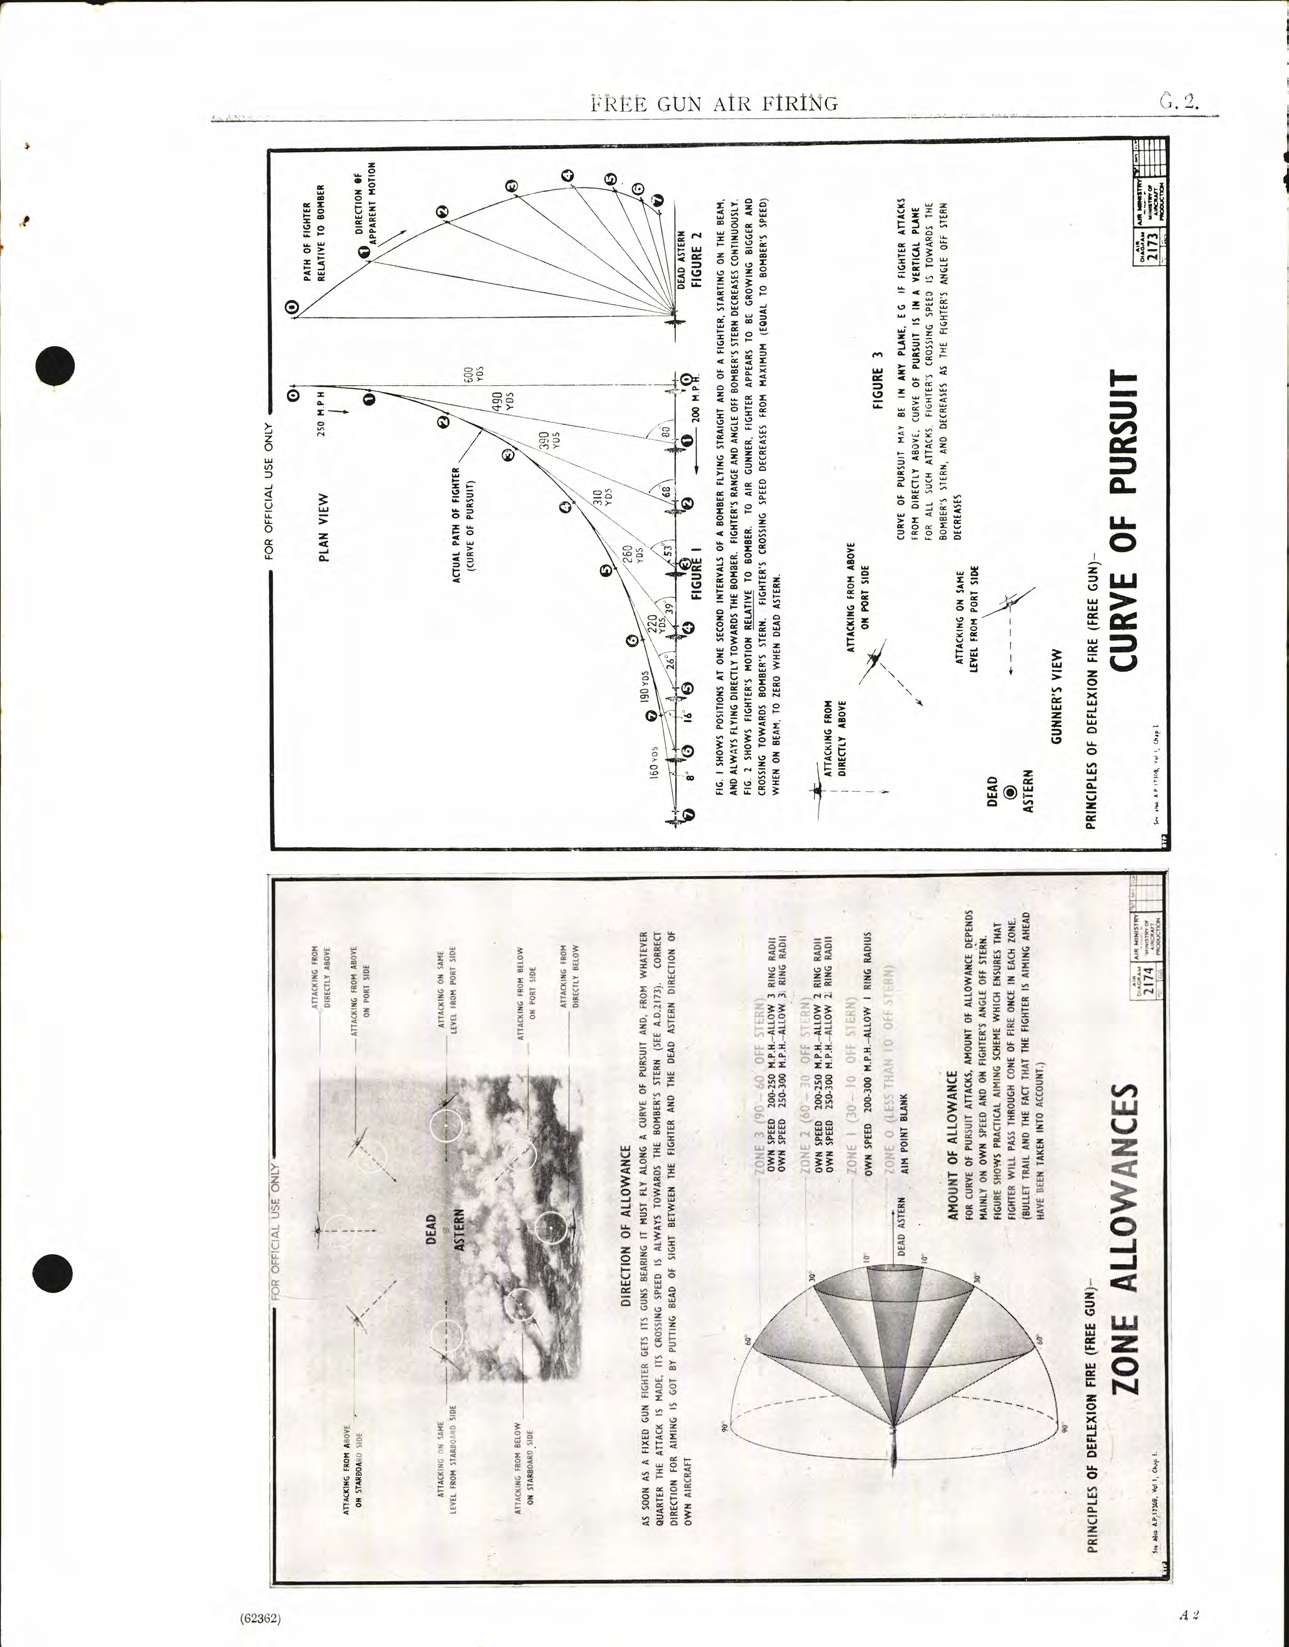 Sample page 5 from AirCorps Library document: Armament; Free Gun Air Firing, Notes for Students